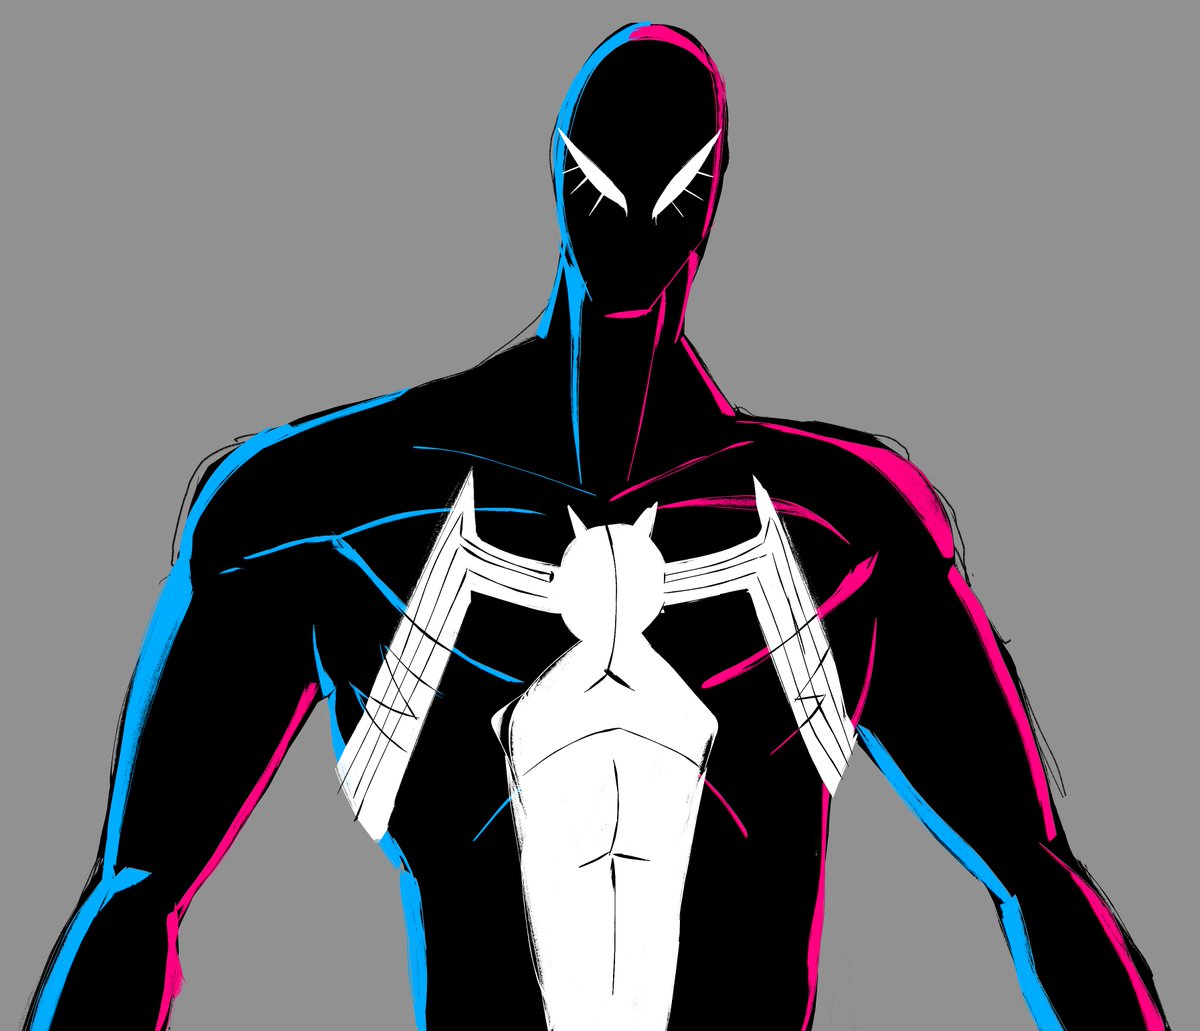 day 313 of drawing spider-man until across the spider-verse comes out

#spiderman #acrossthespiderverse https://t.co/S29hUMA6a4